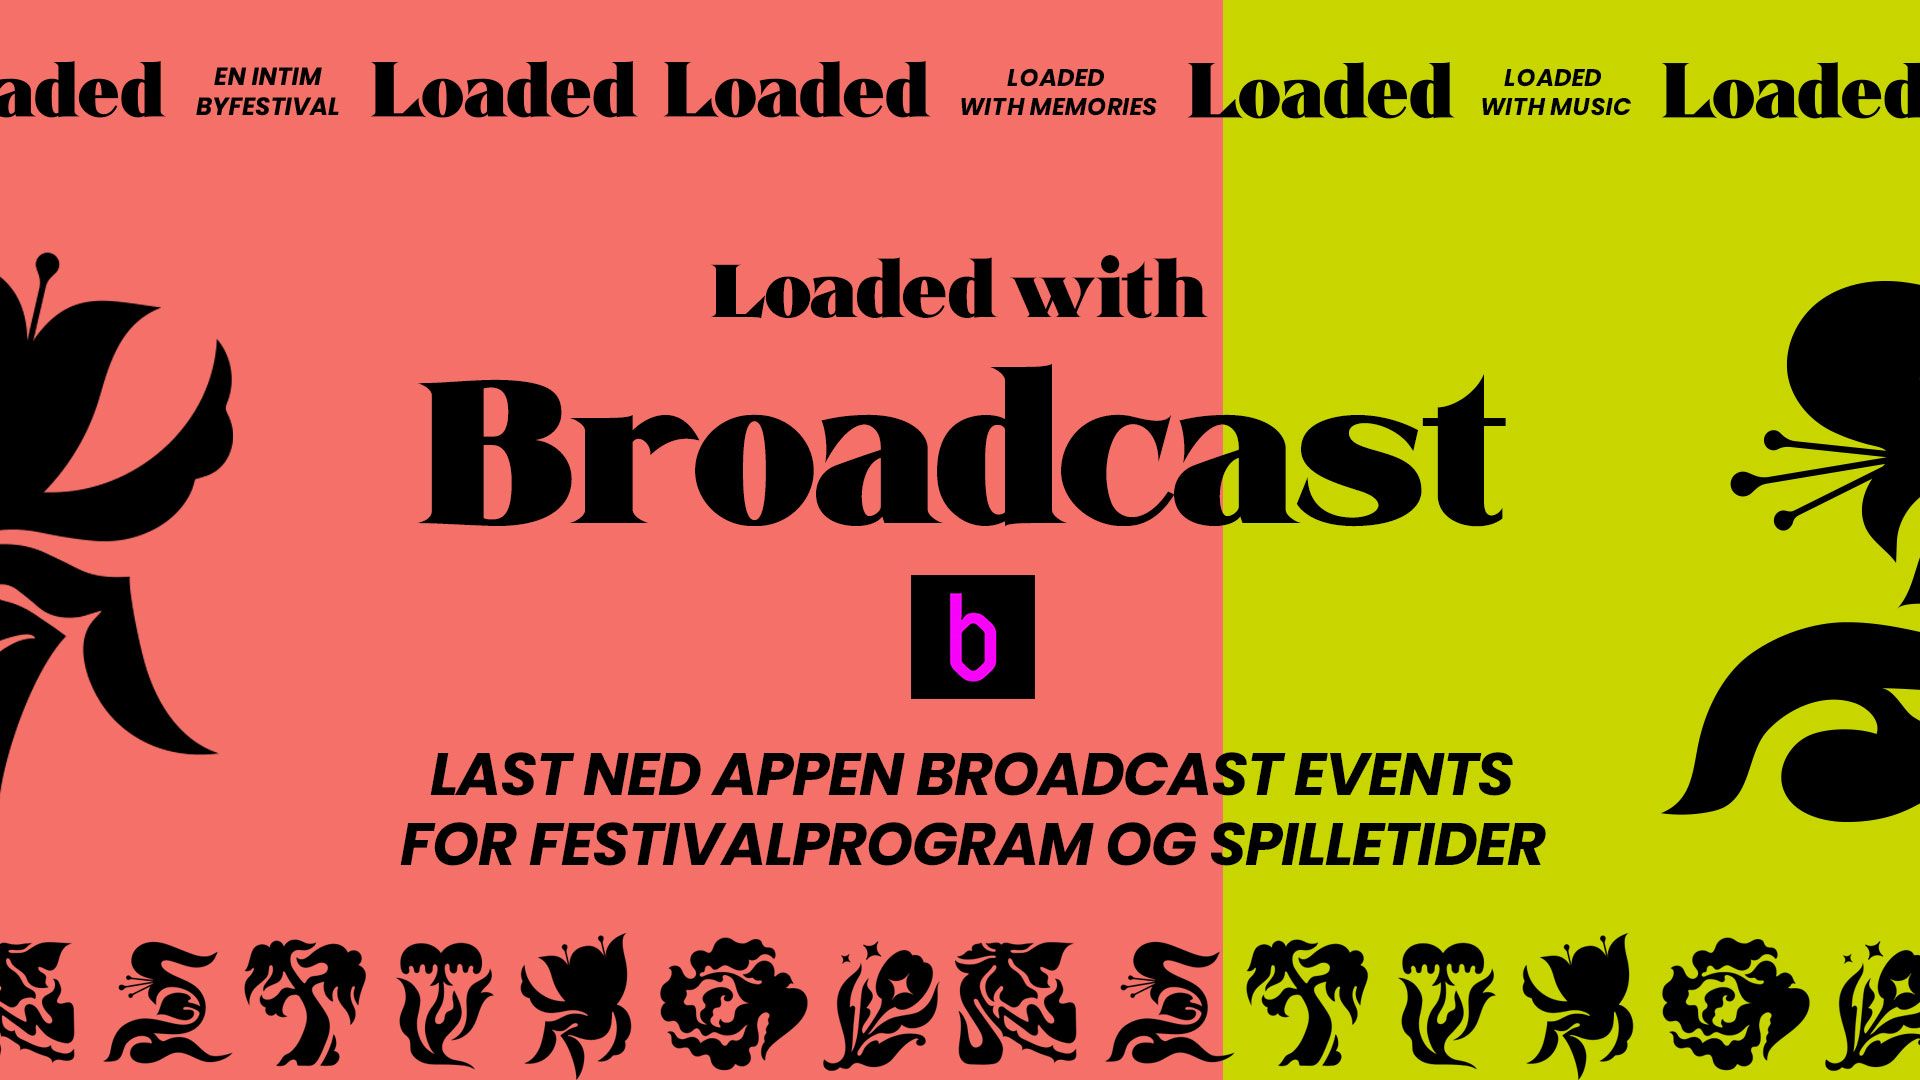 Cover Image for Broadcast is the official app guide for the Loaded festival!